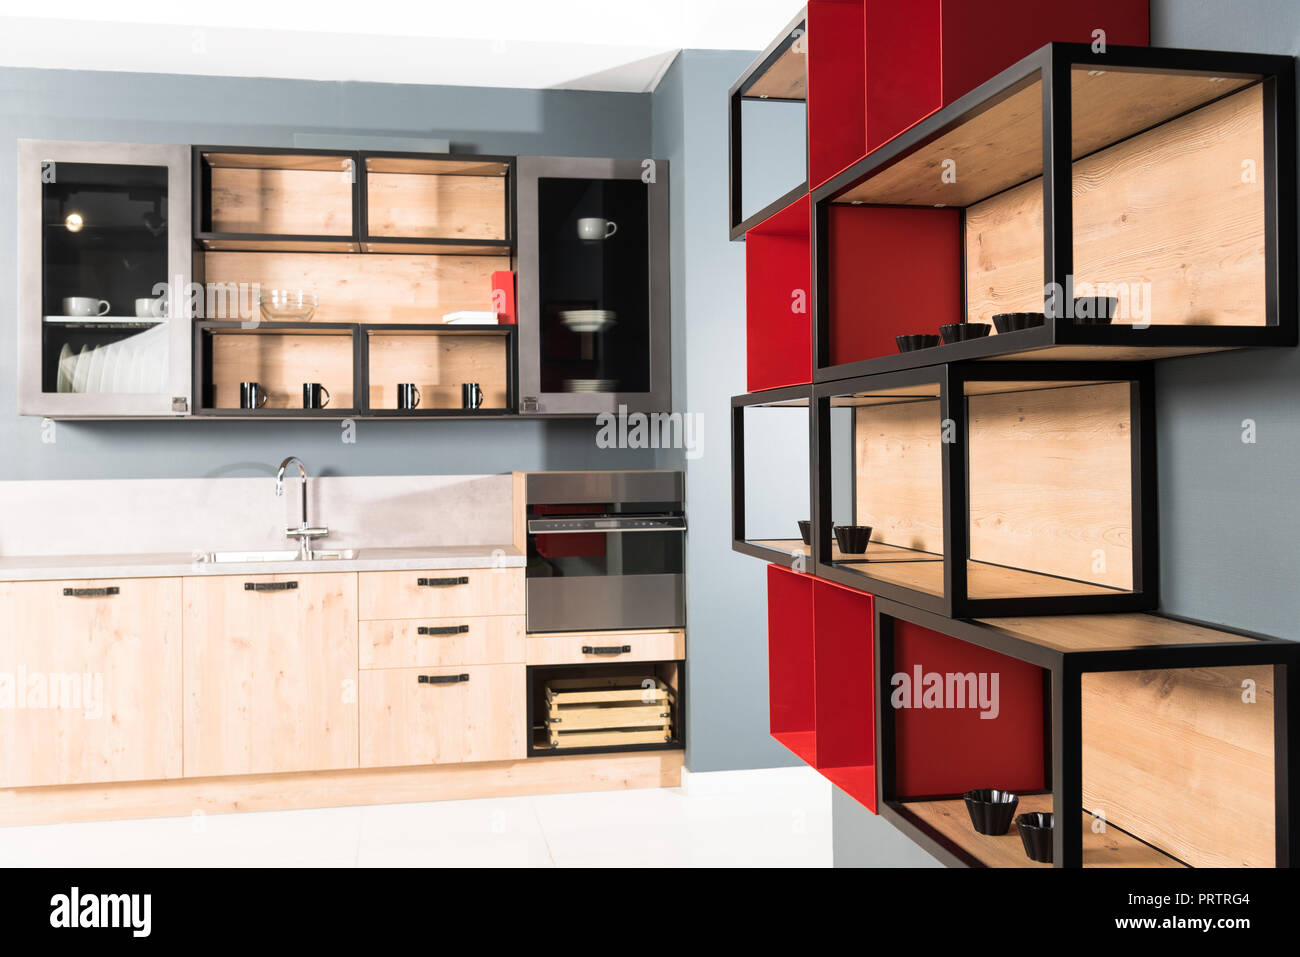 interior of modern clean light kitchen with kitchen counters and red shelves Stock Photo